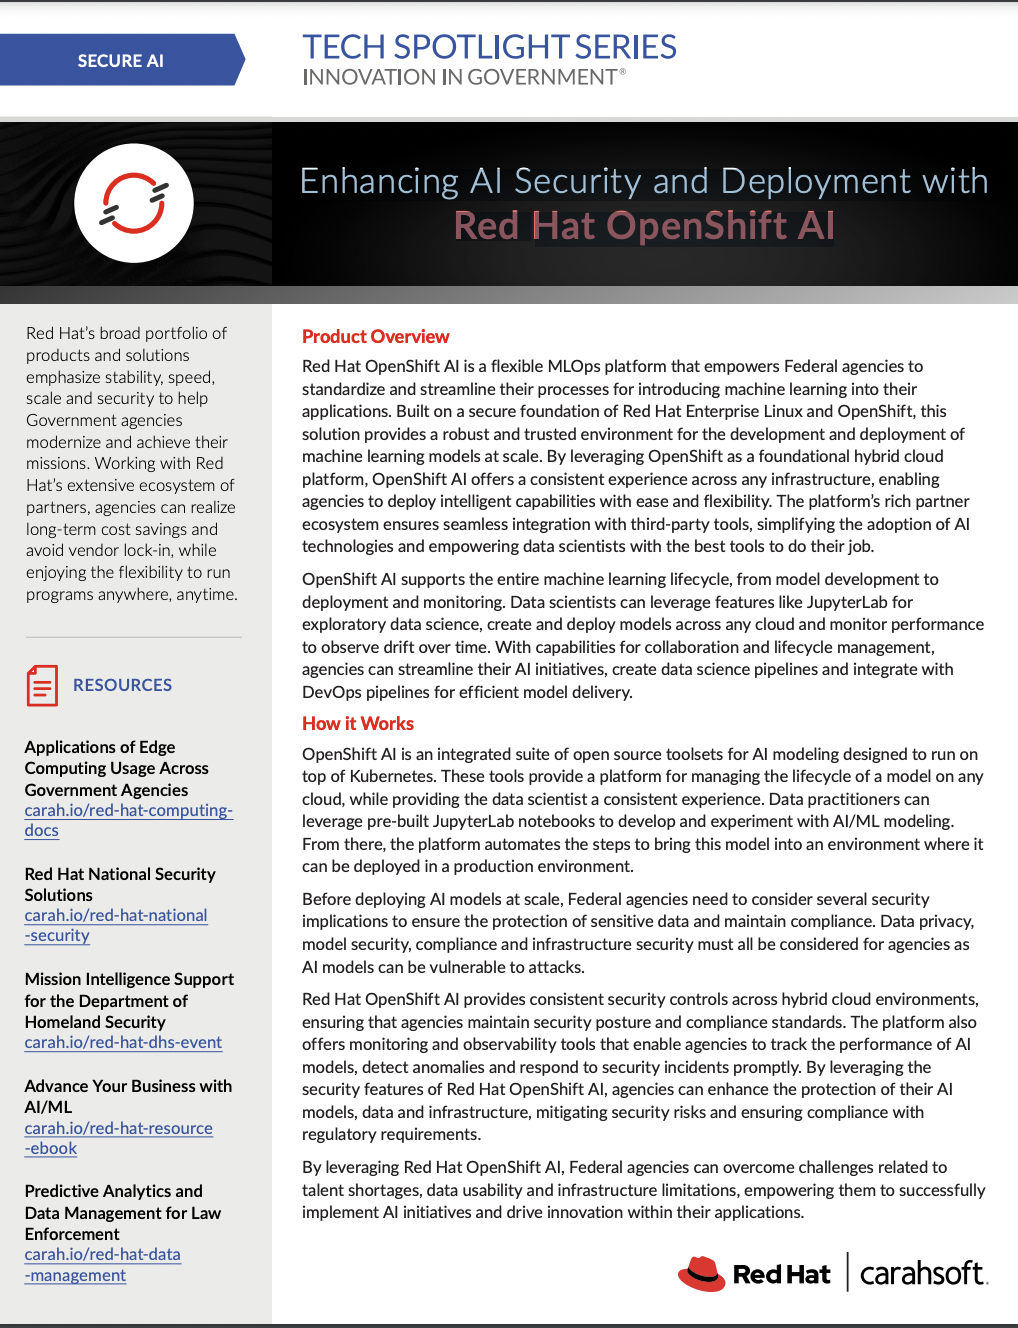 Enhancing AI Security and Deployment with Red Hat OpenShift AI